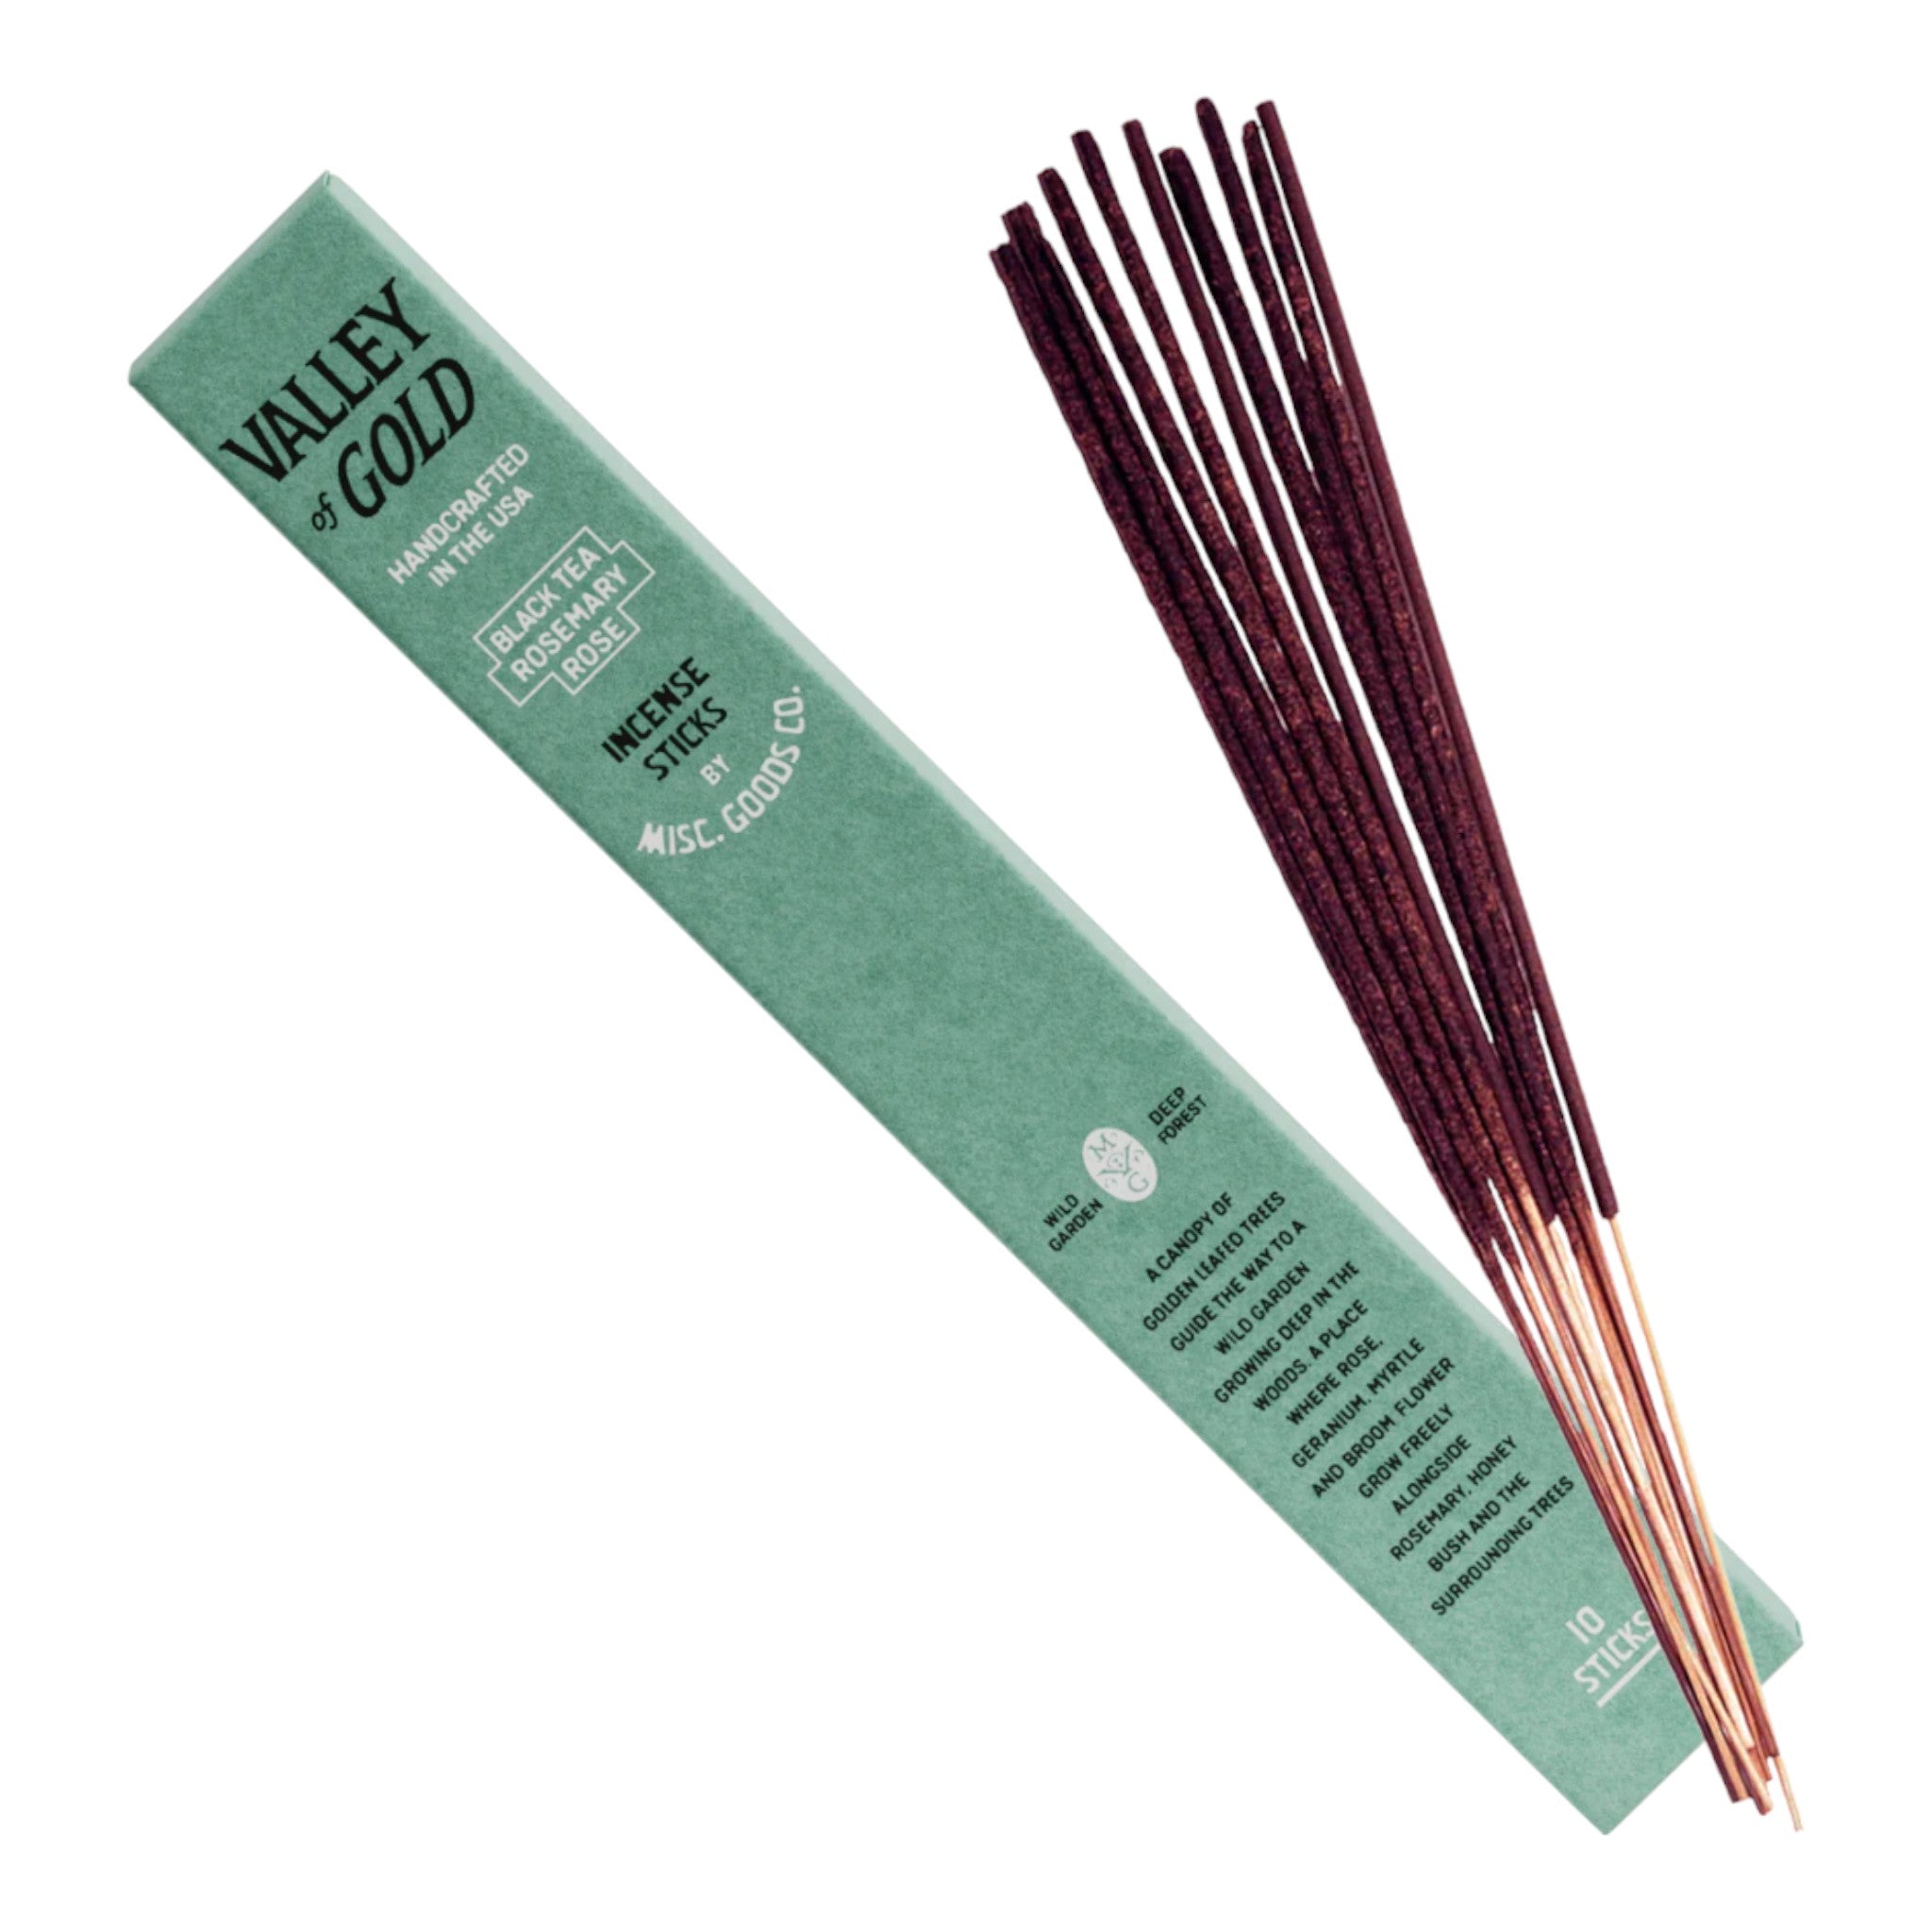 Misc. Goods - Valley of Gold Stick Incense